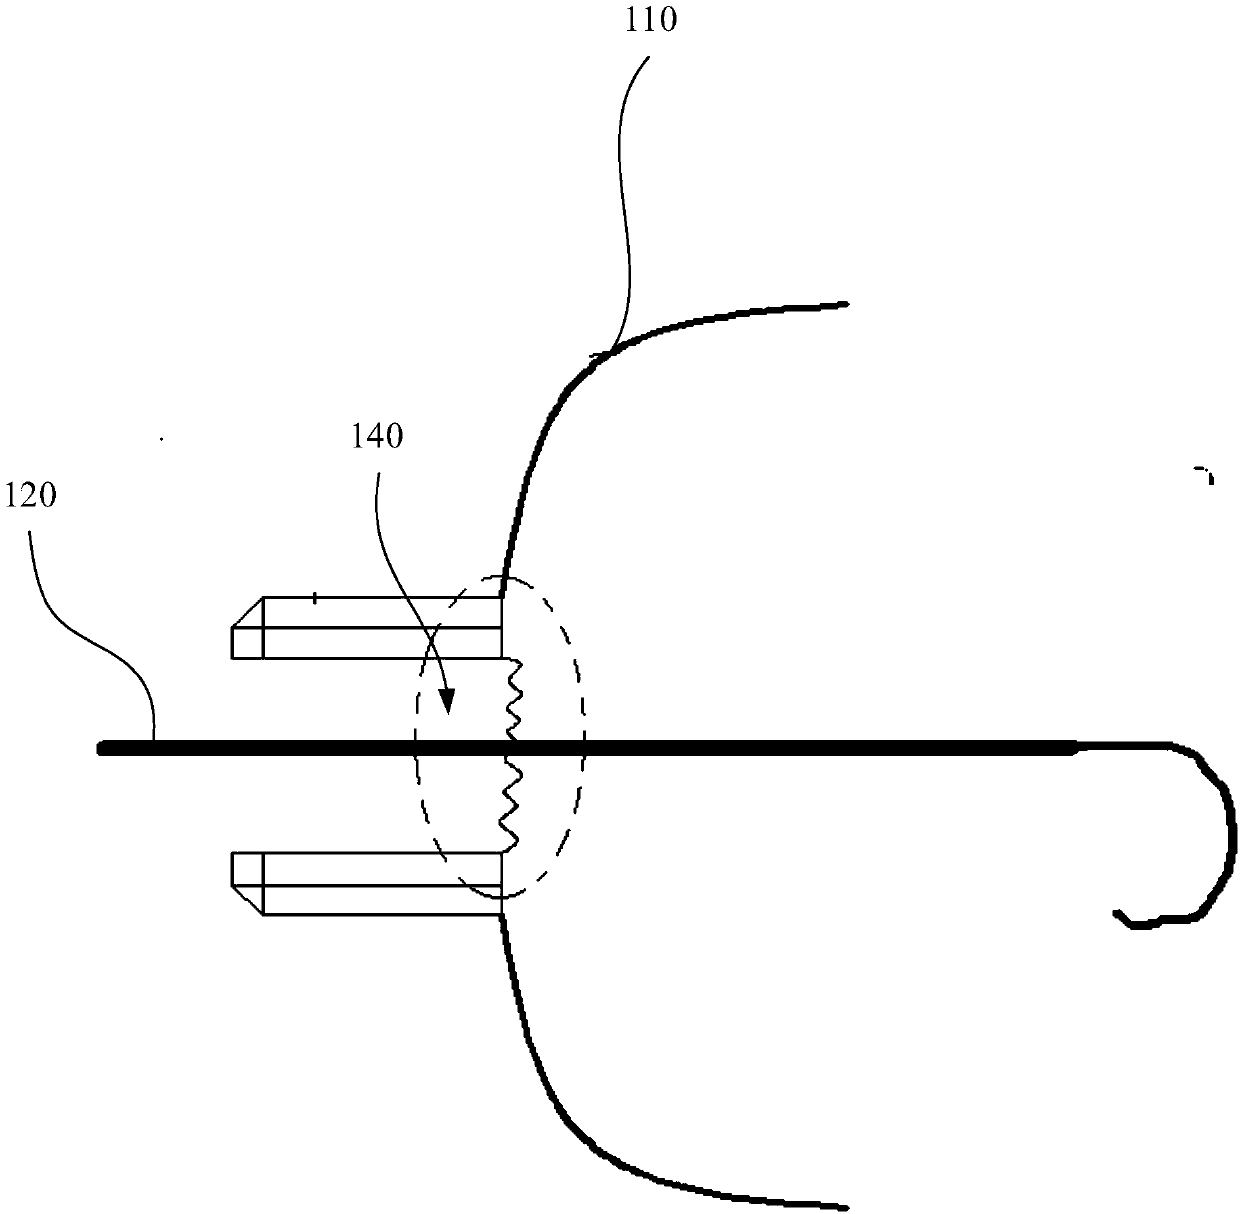 Left auricle occluder and occluding device